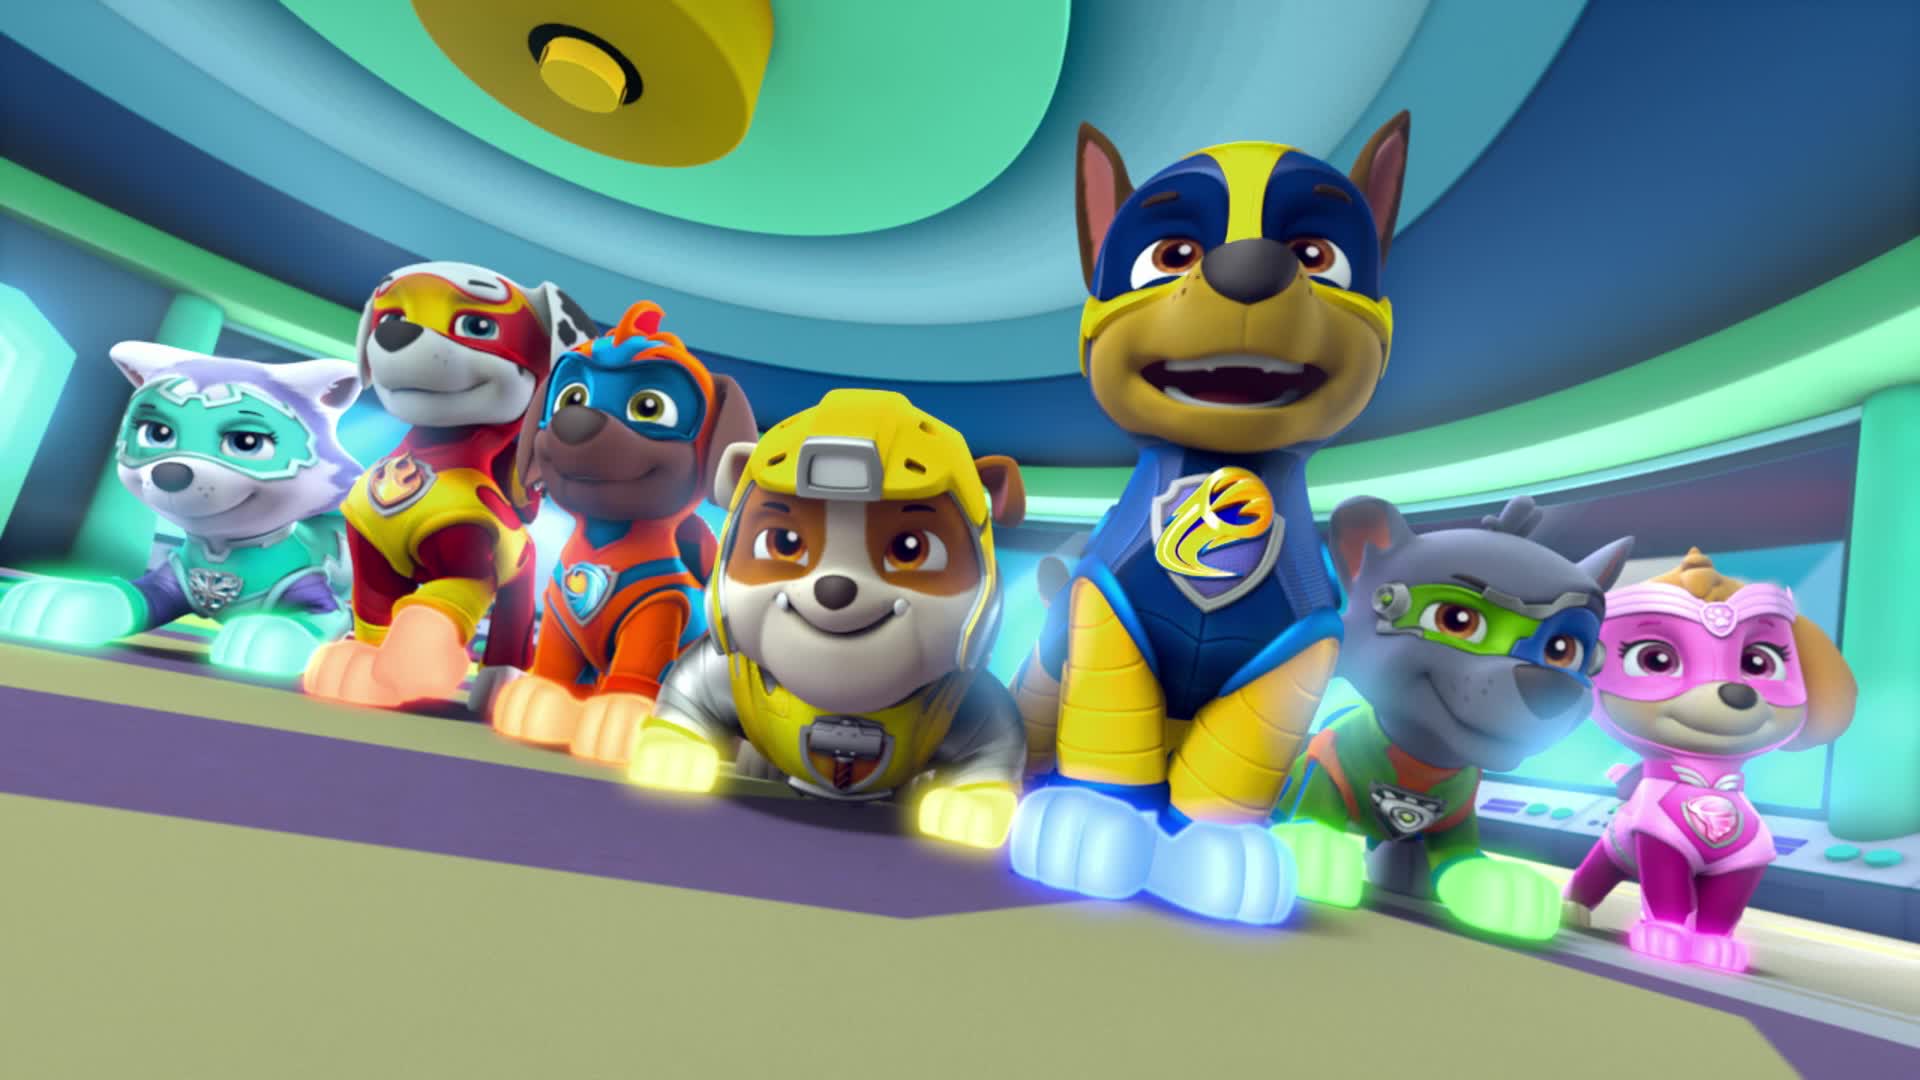 PAW Patrol Mighty Pups (TV Episode 2018)